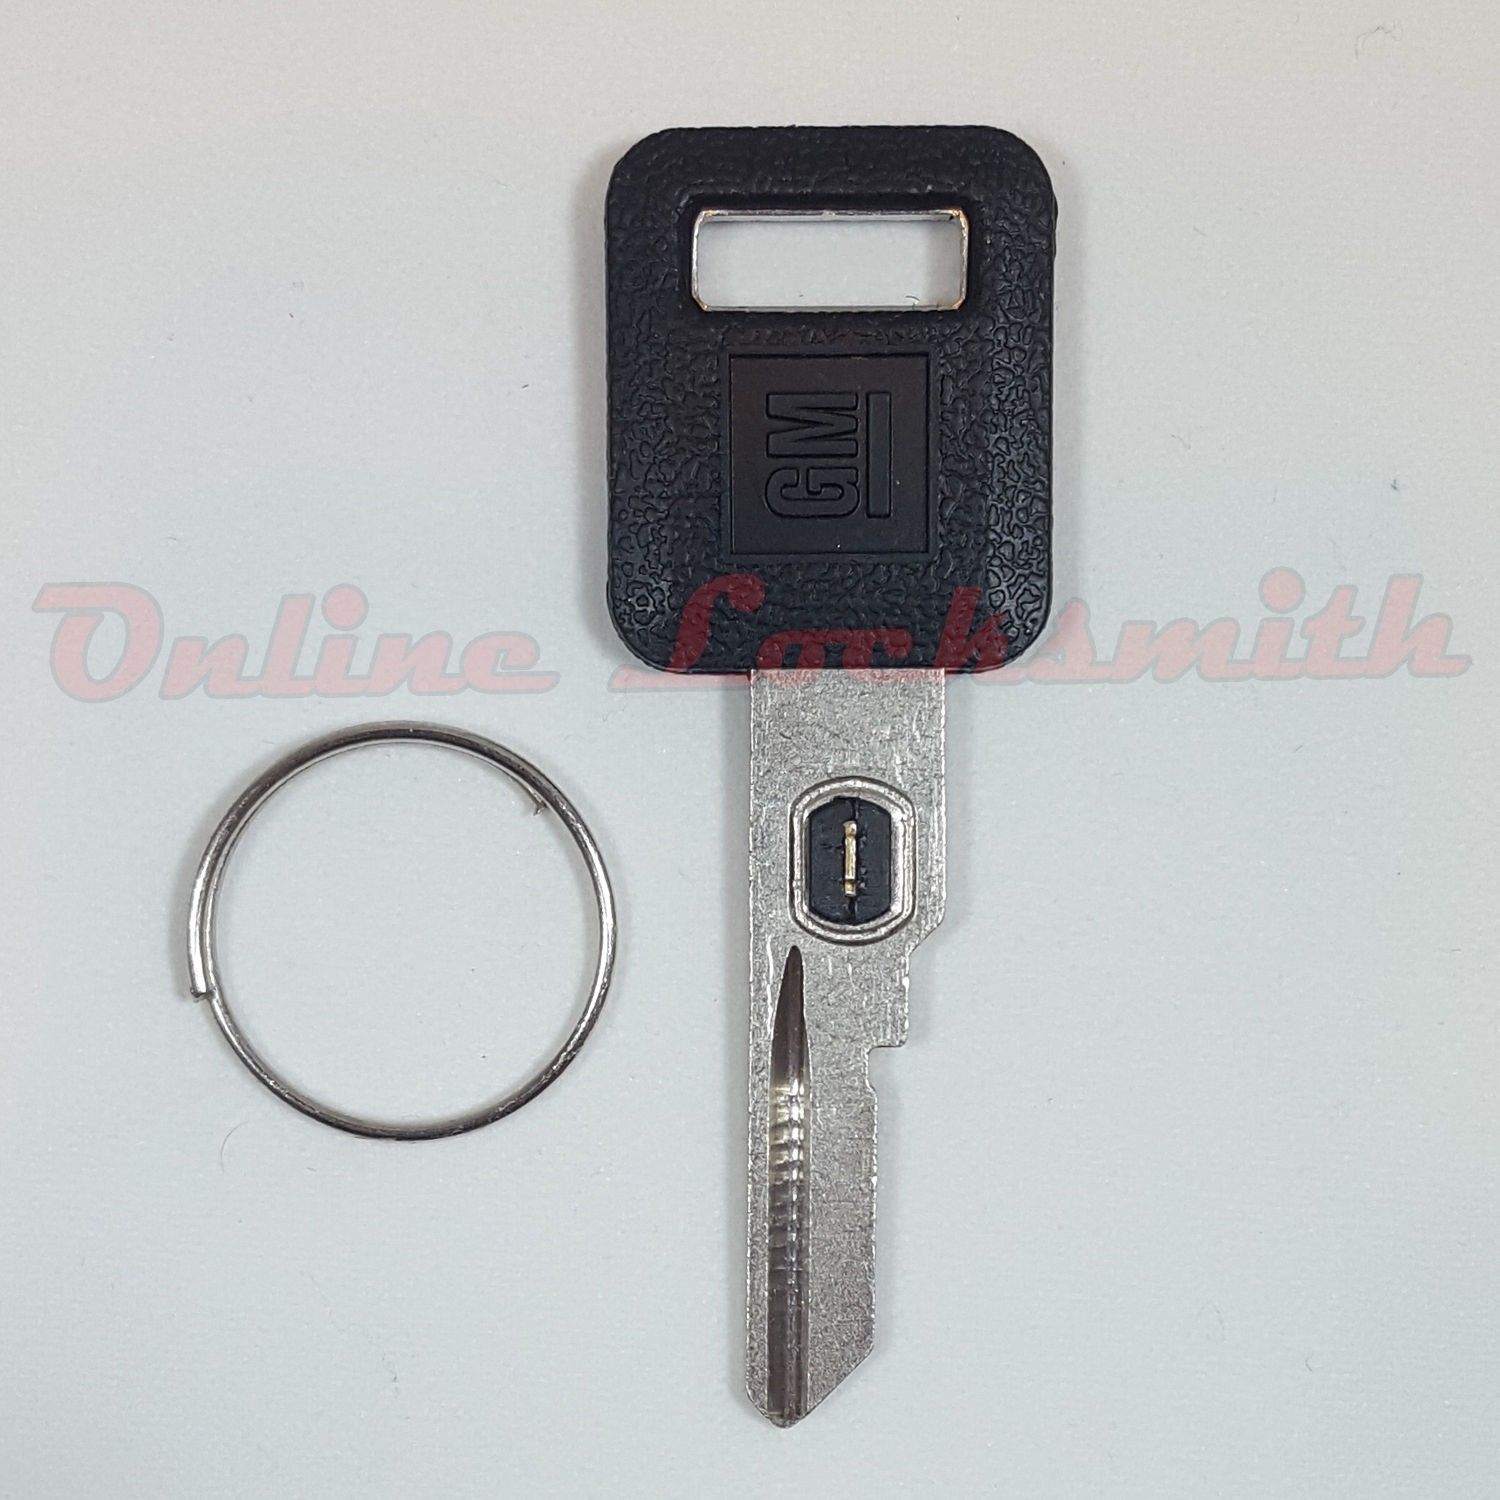 NEW GM Double Sided VATS Ignition Key #15 MADE IN USA Doors/Trunk OEM Key